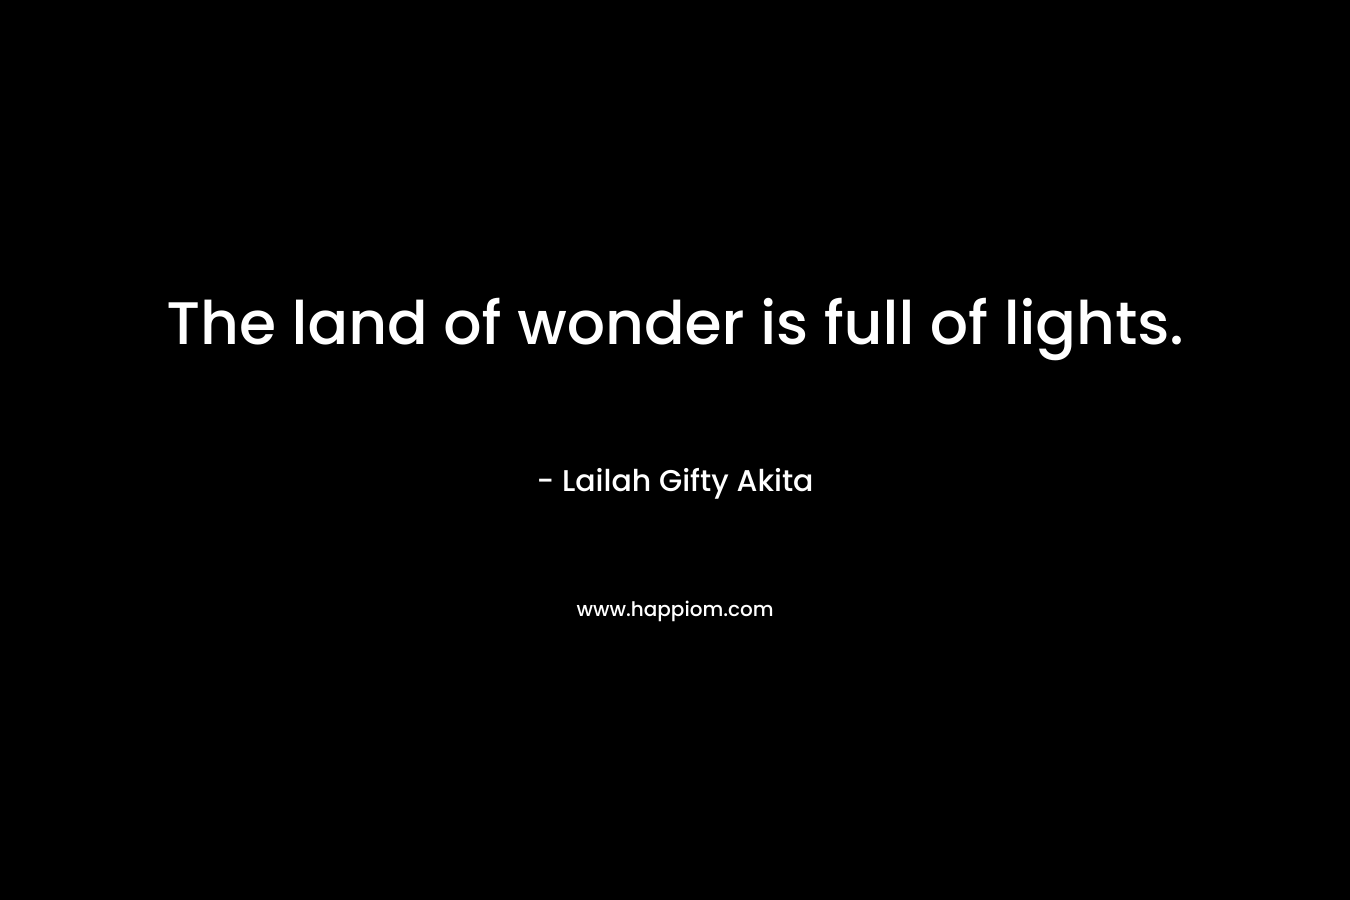 The land of wonder is full of lights. – Lailah Gifty Akita